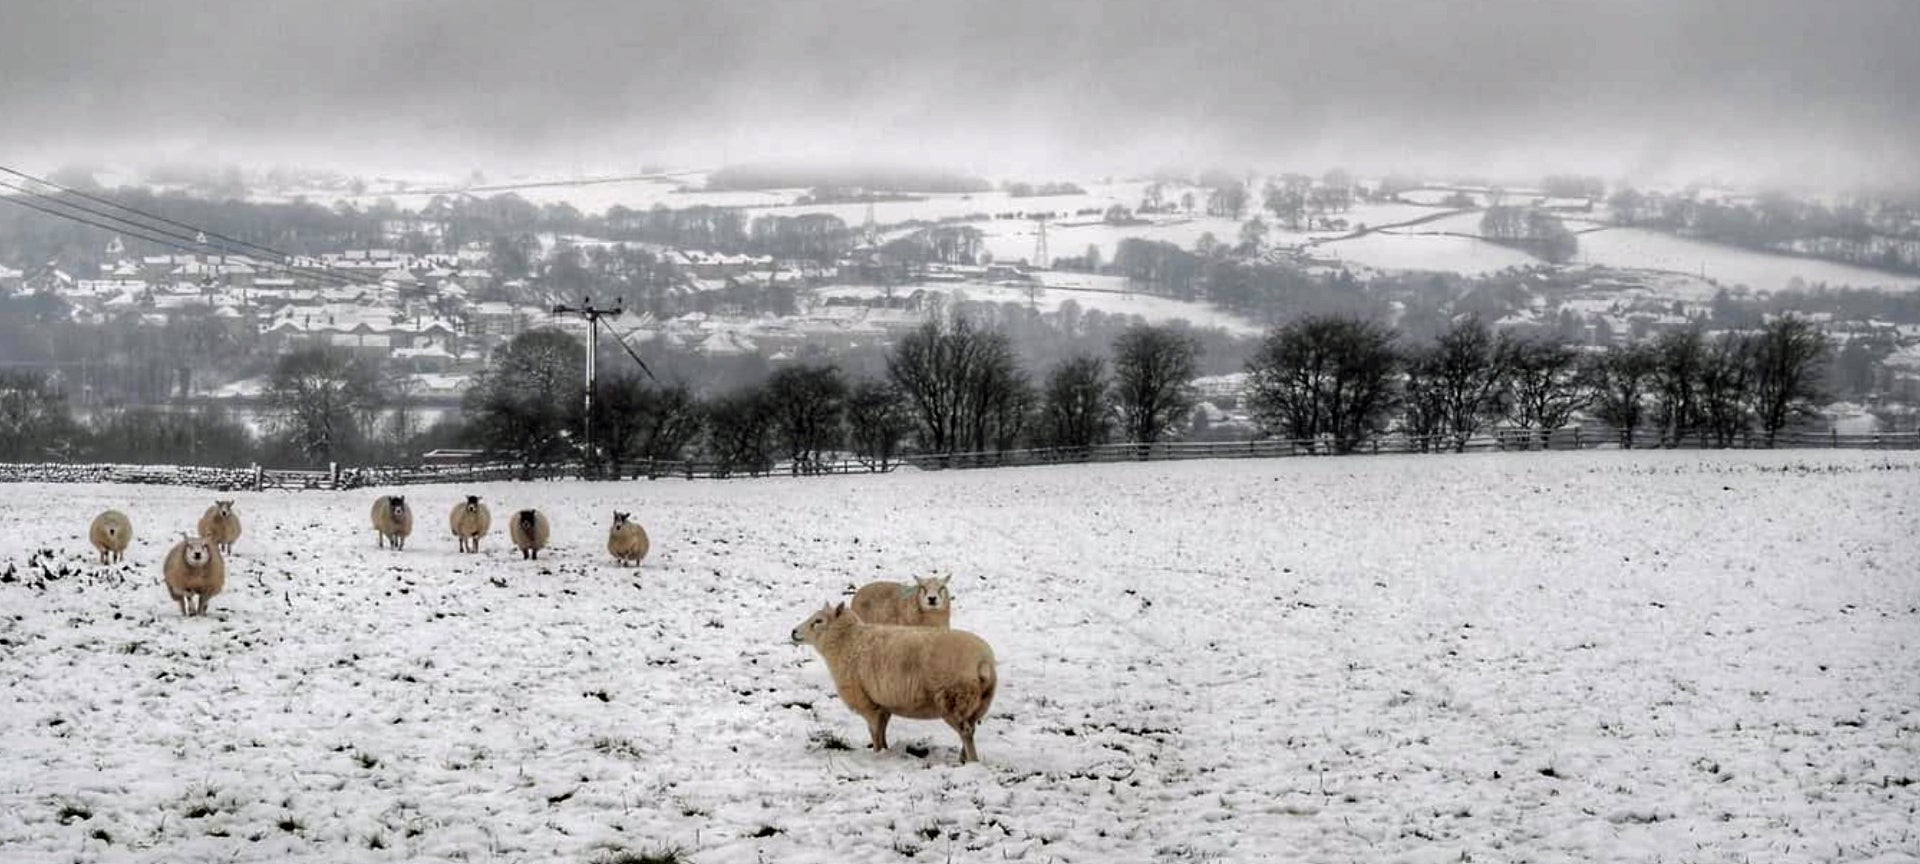 Parts of the UK saw a white Christmas this year